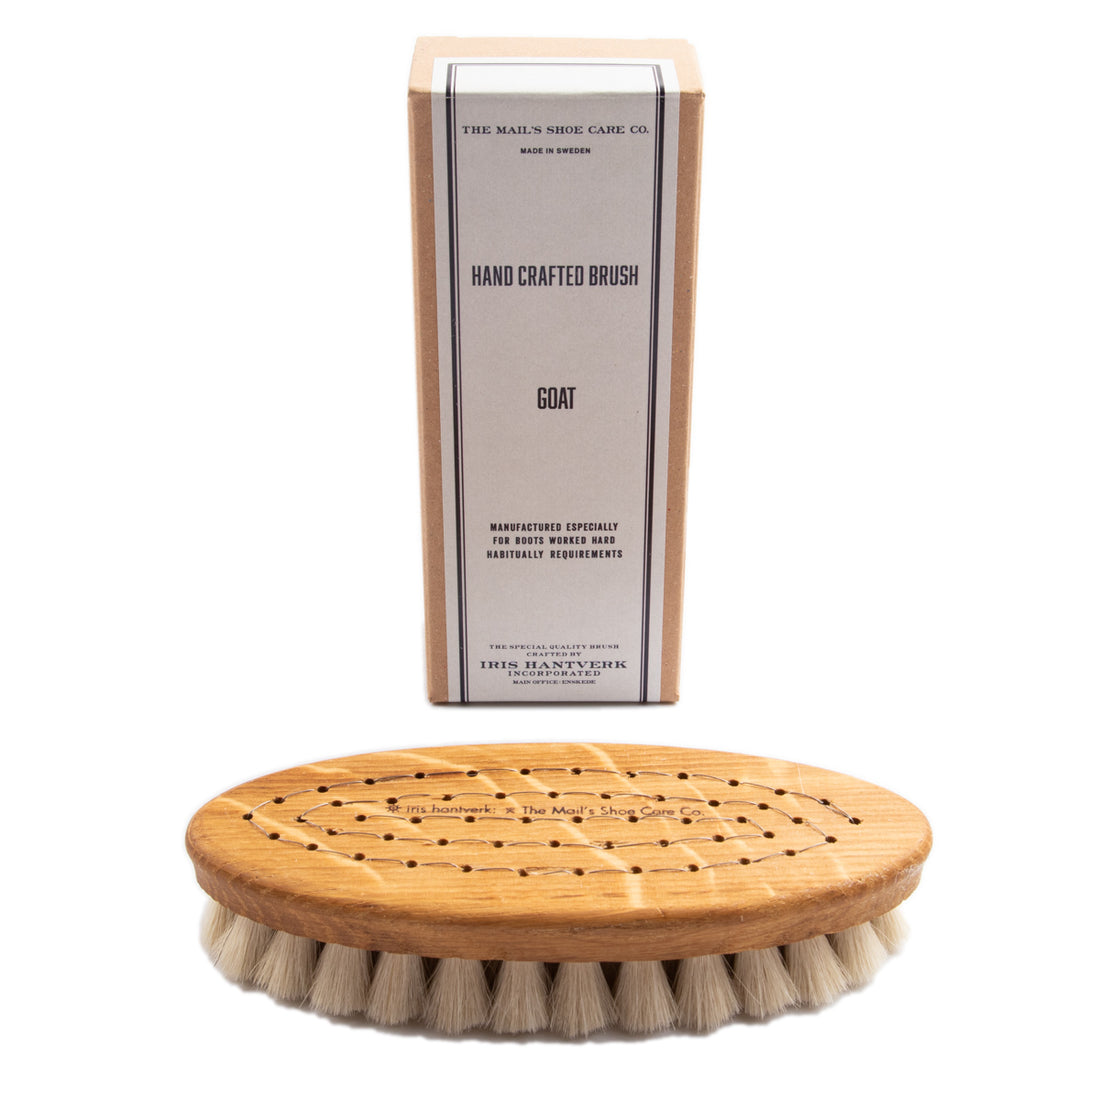 Clinch Boots The Mail's Shoe Care Co - Goat hair Brush - Standard & Strange